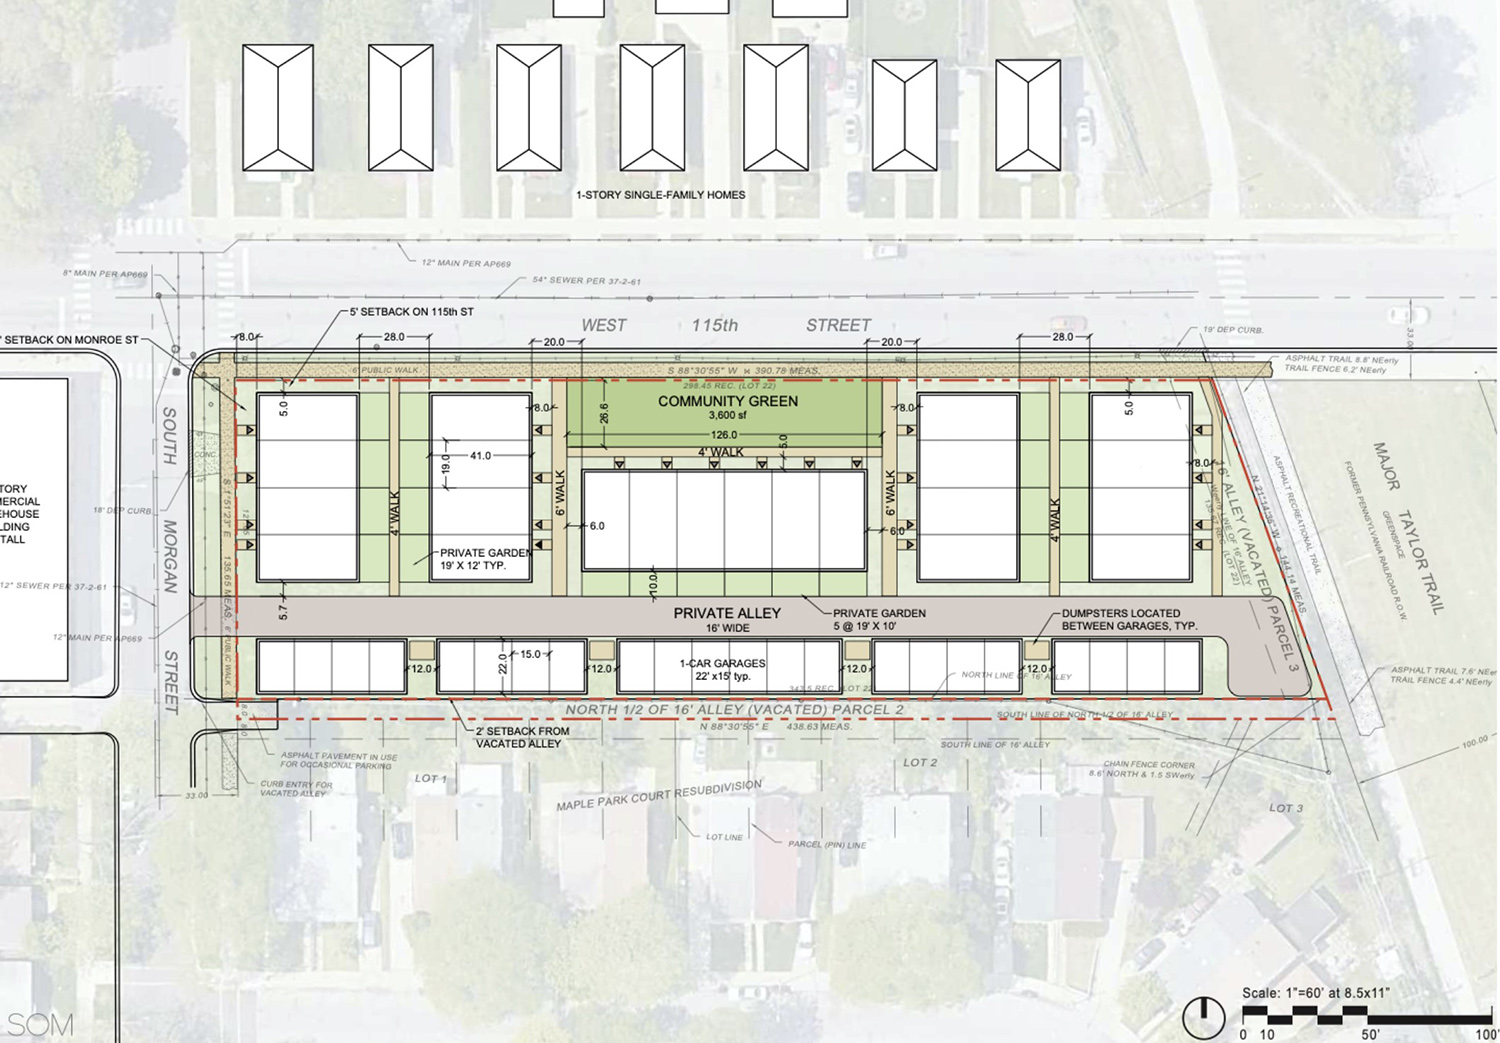 Site Plan for 955 W 115th Street. Drawing by SOM